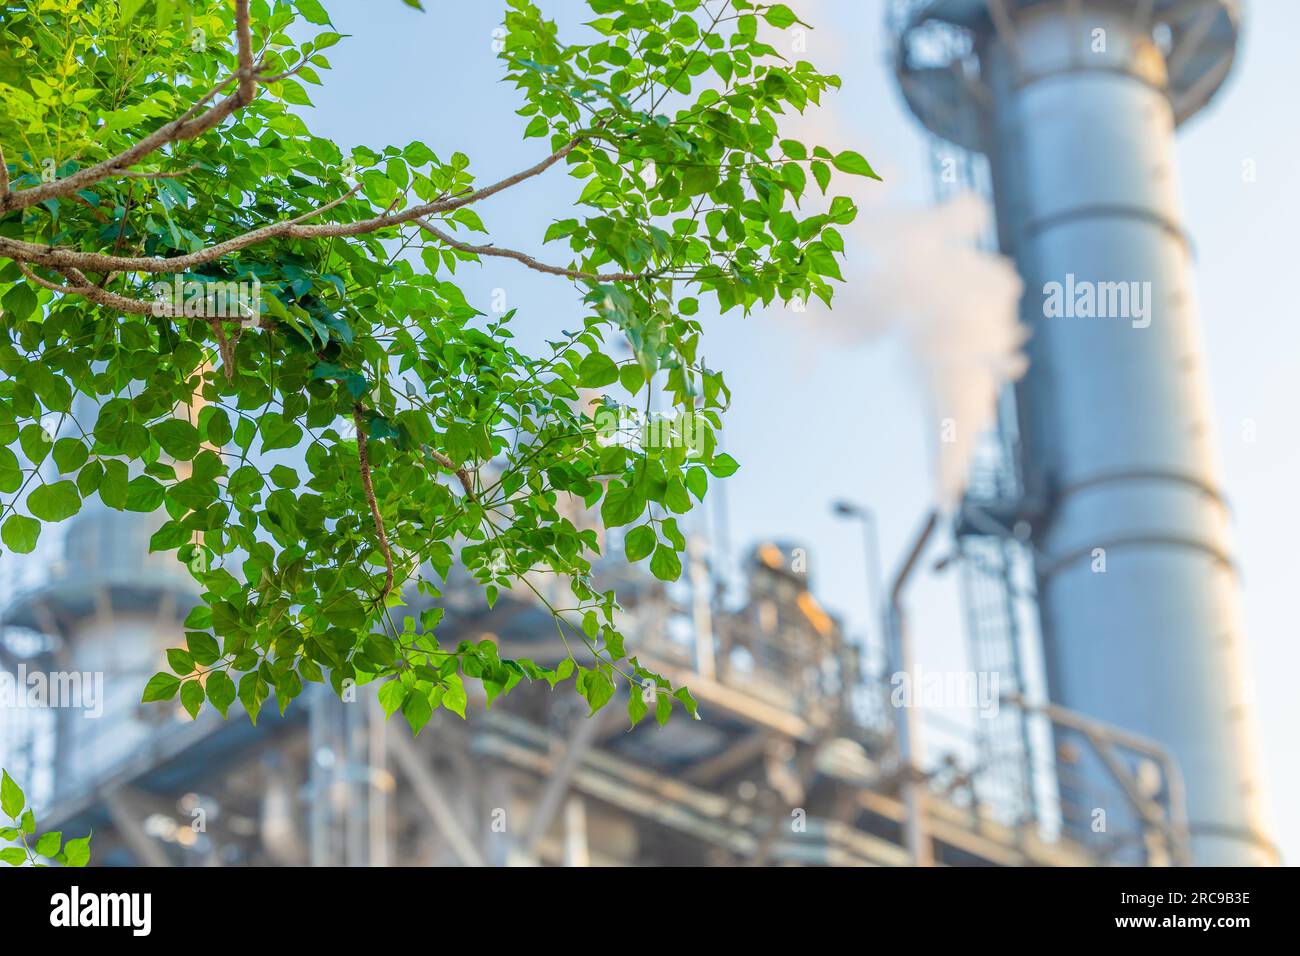 Green factory industry for good environment ozone air low carbon footprint production concept. Stock Photo